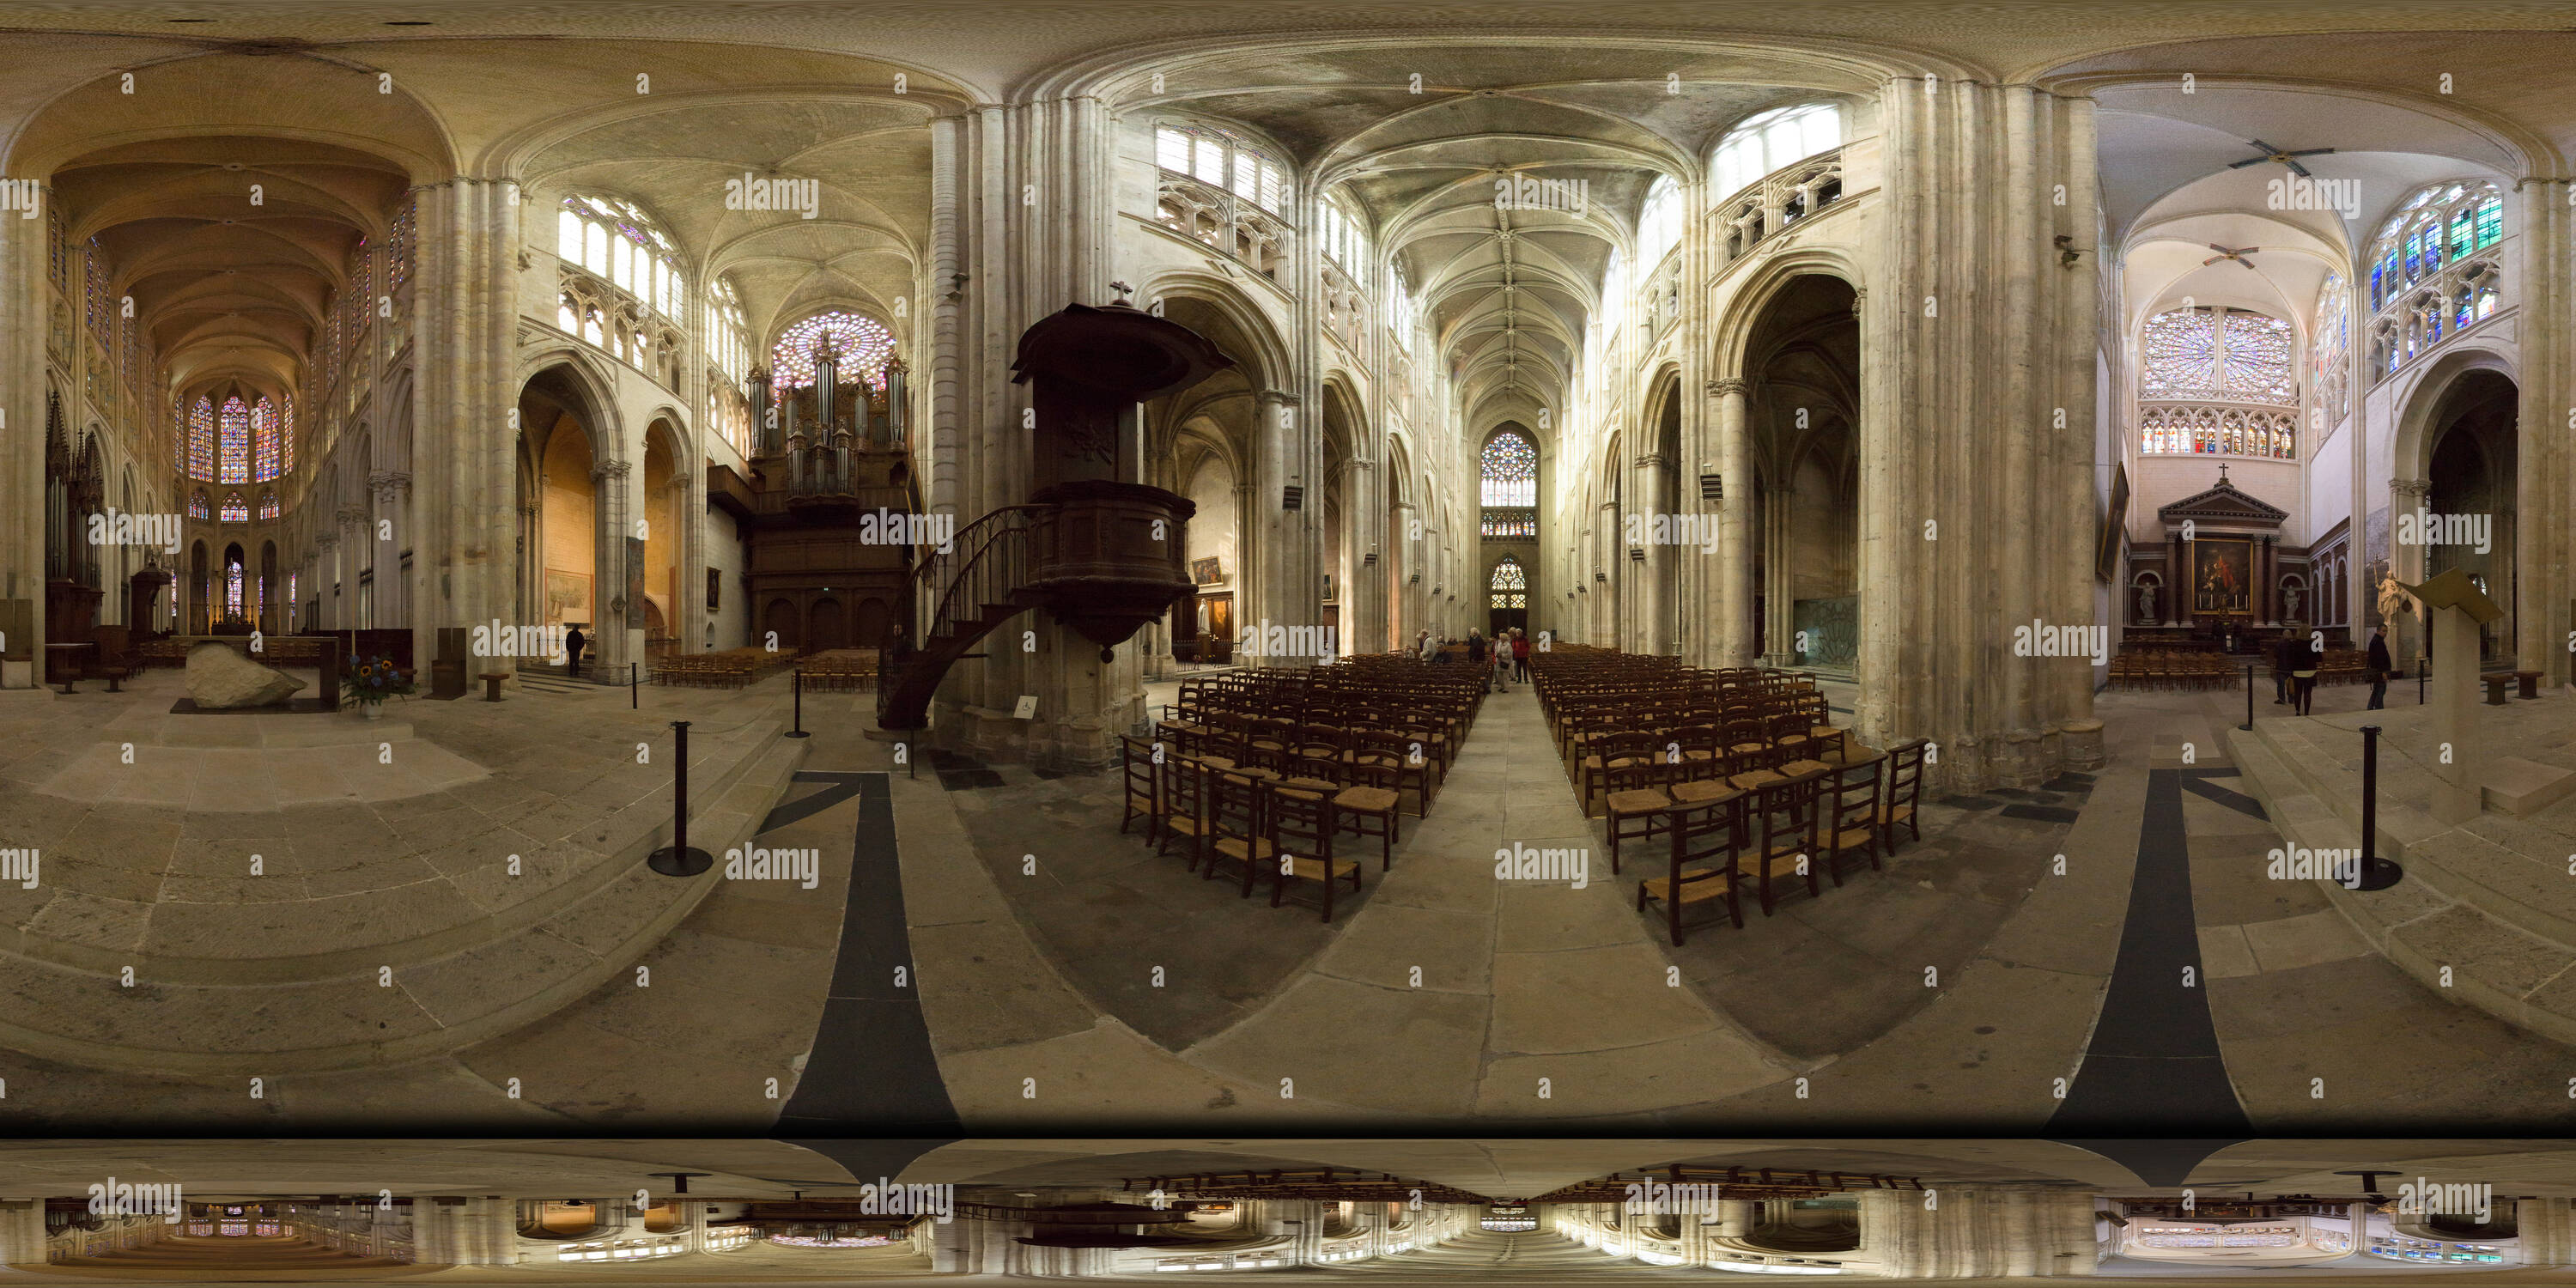 360 degree panoramic view of Cathedral St Gatien, Crossing, Tours, 2016-10, freehand